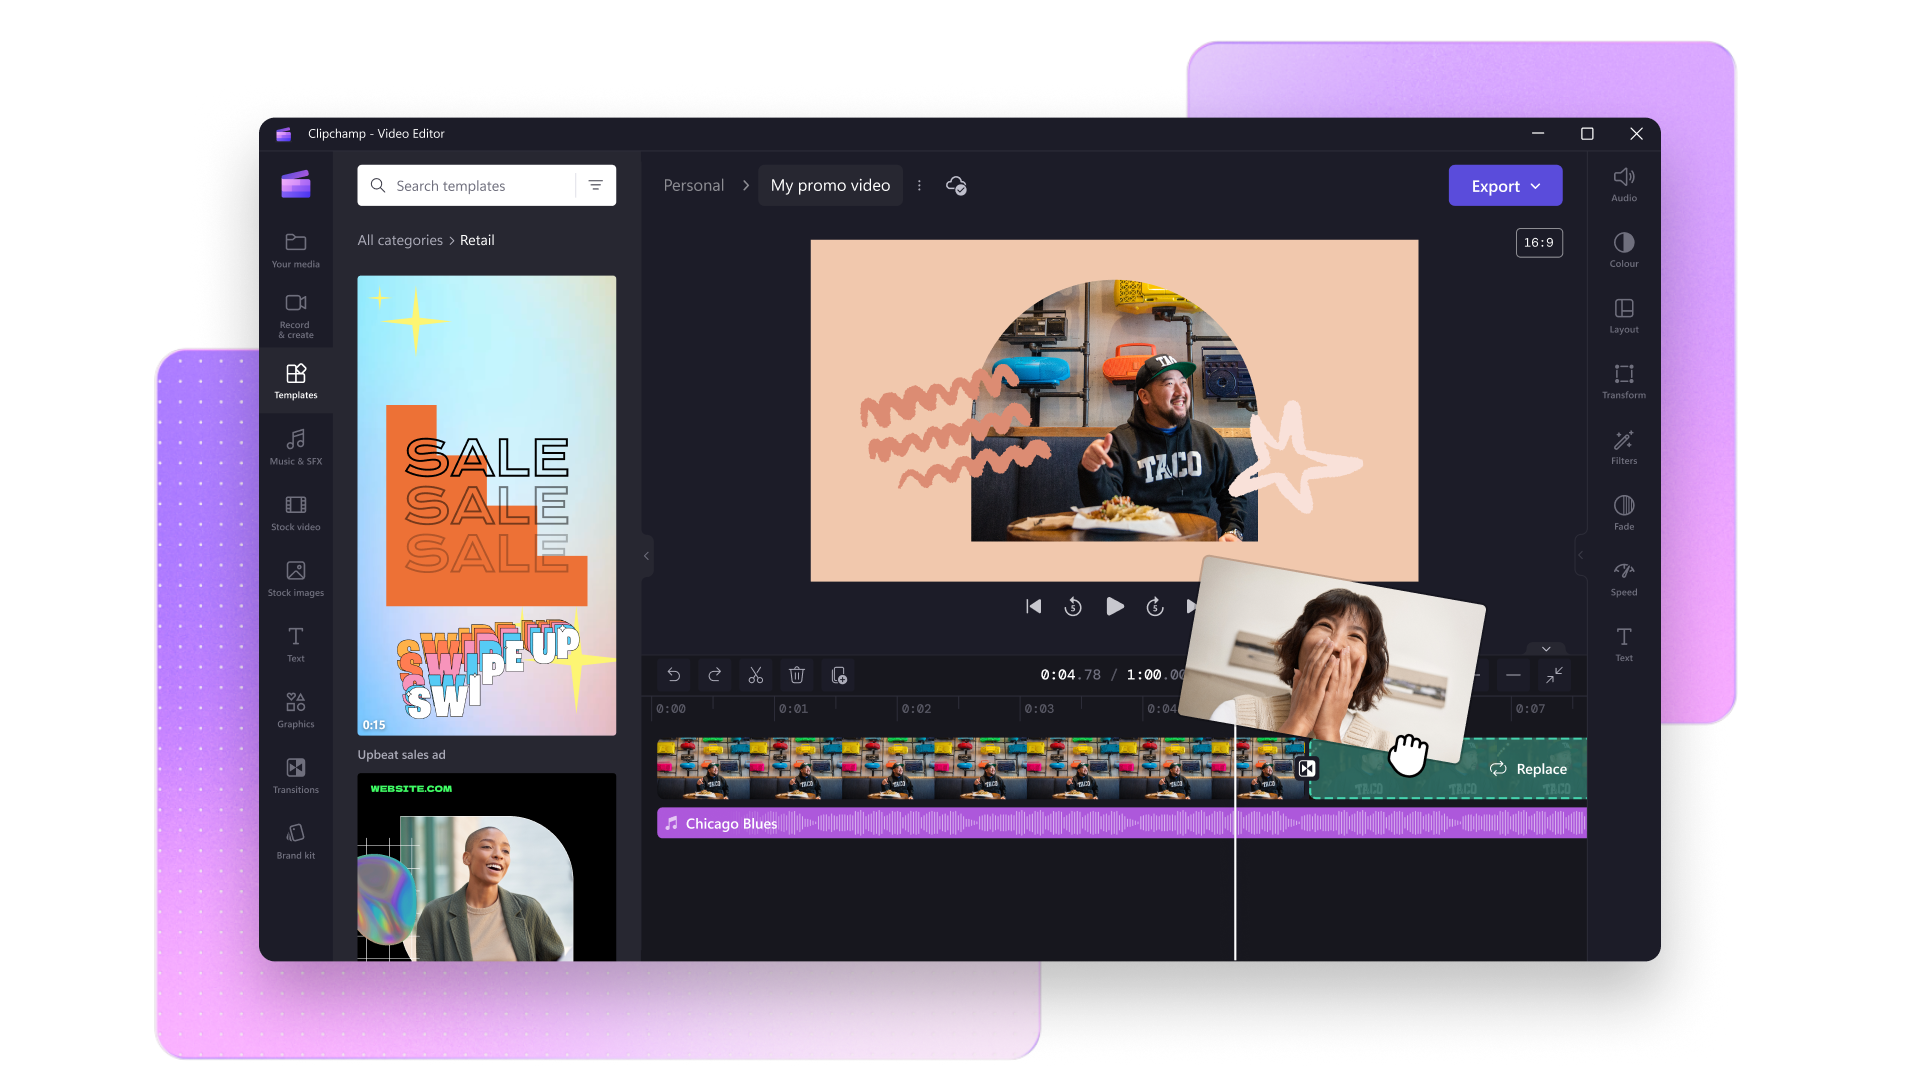 An image of Clipchamp video editor showcasing a template option. There is an image of an excited woman being added to the video editing timeline.